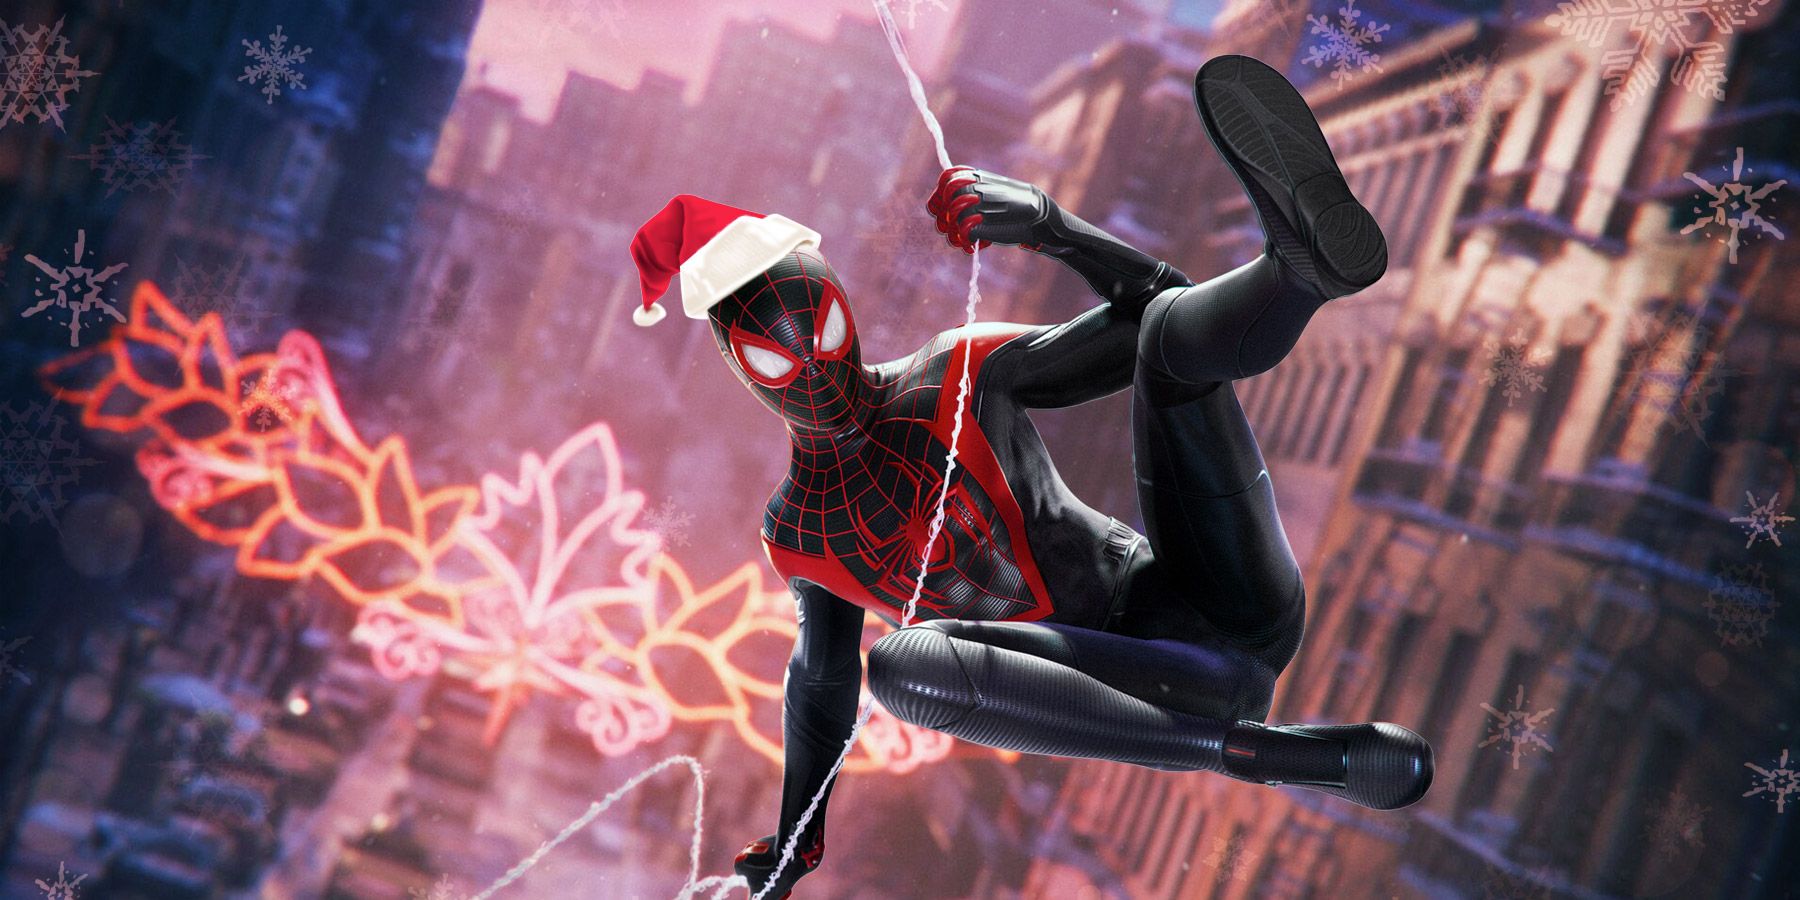 Wallpaper ID 627516  text Spiderman Noir decoration Marvel Super  Heroes Games posters christmas ornament Platinum Conception Wallpapers  SpiderMan digital composite free download